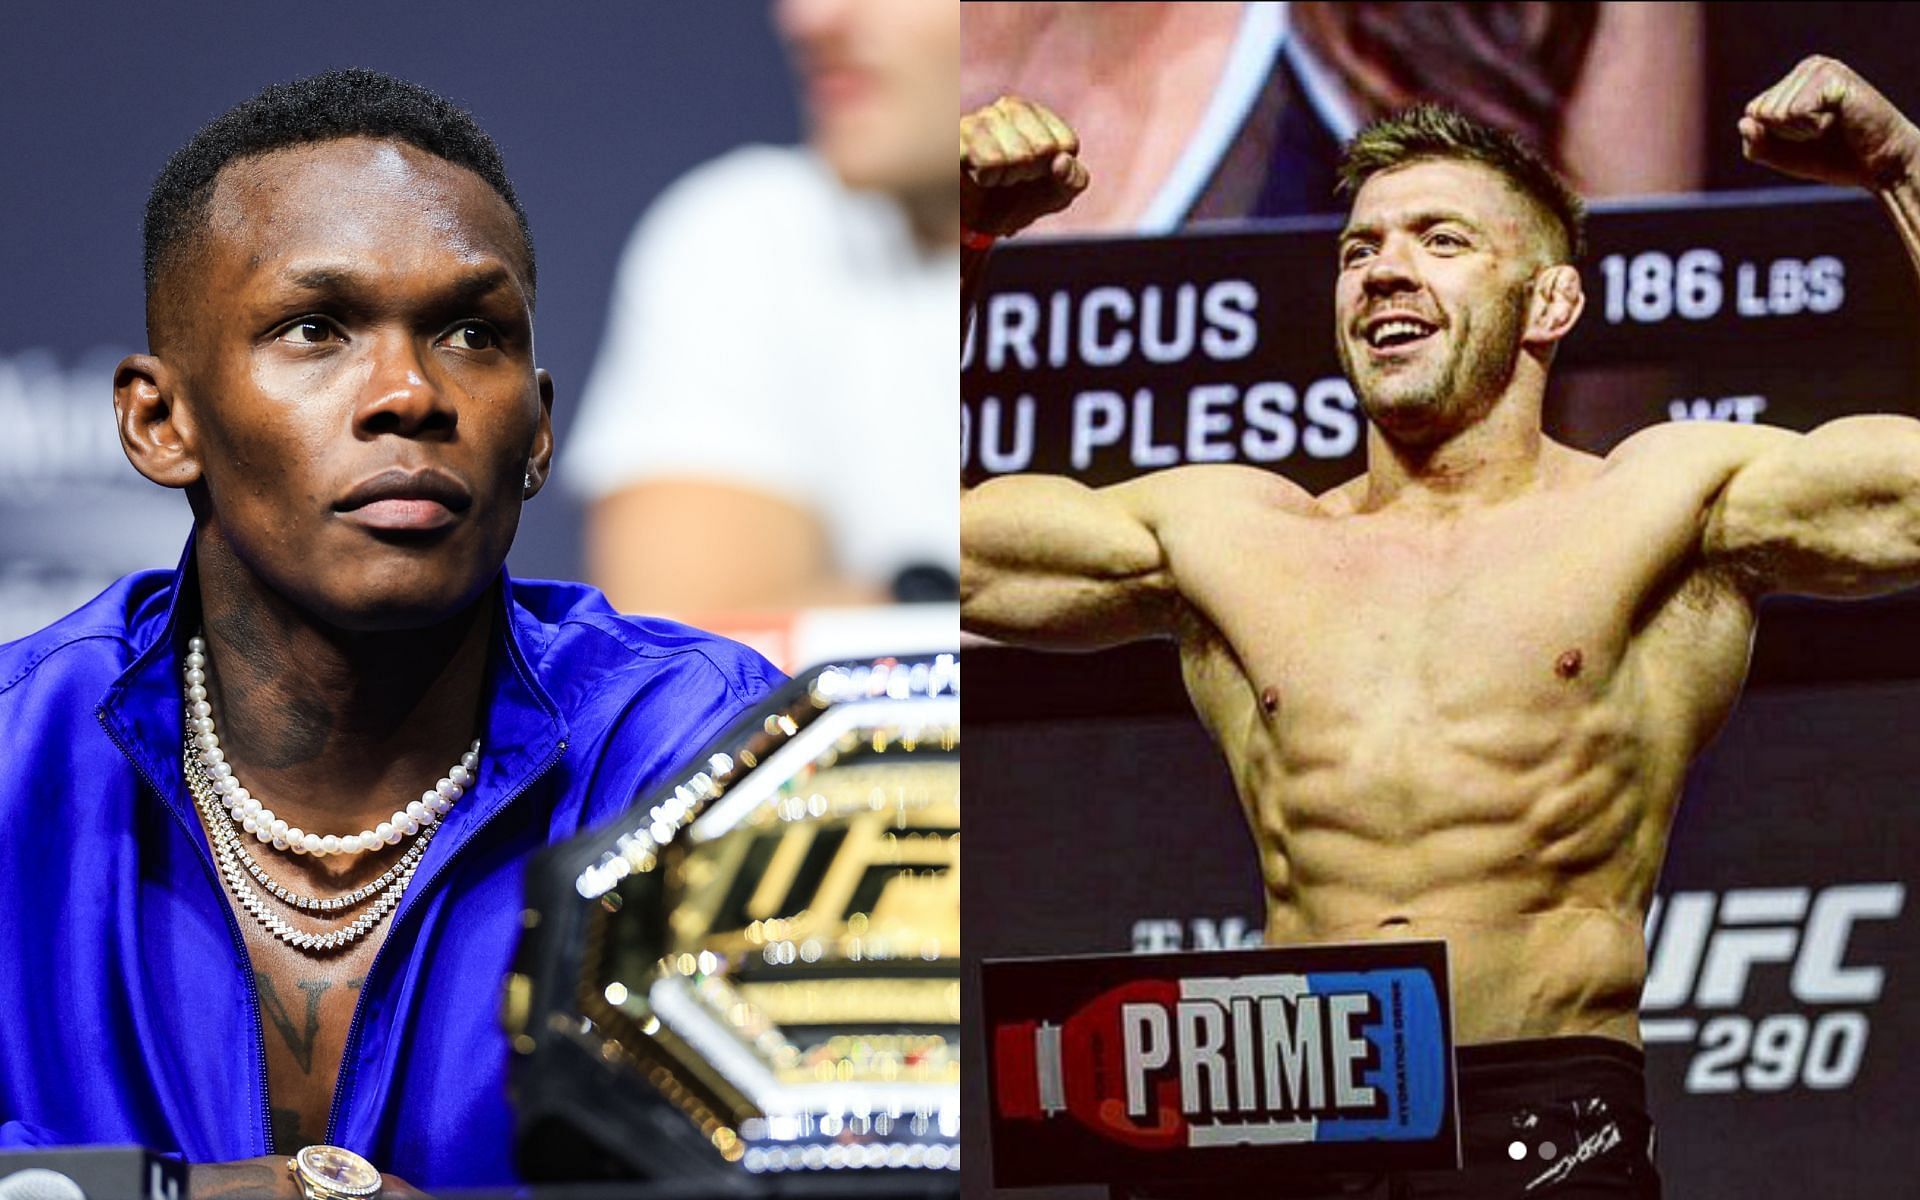 Israel Adesanya and Dricus du Plessis [Image credits: @dricusduplessis on Instagram and Getty Images]